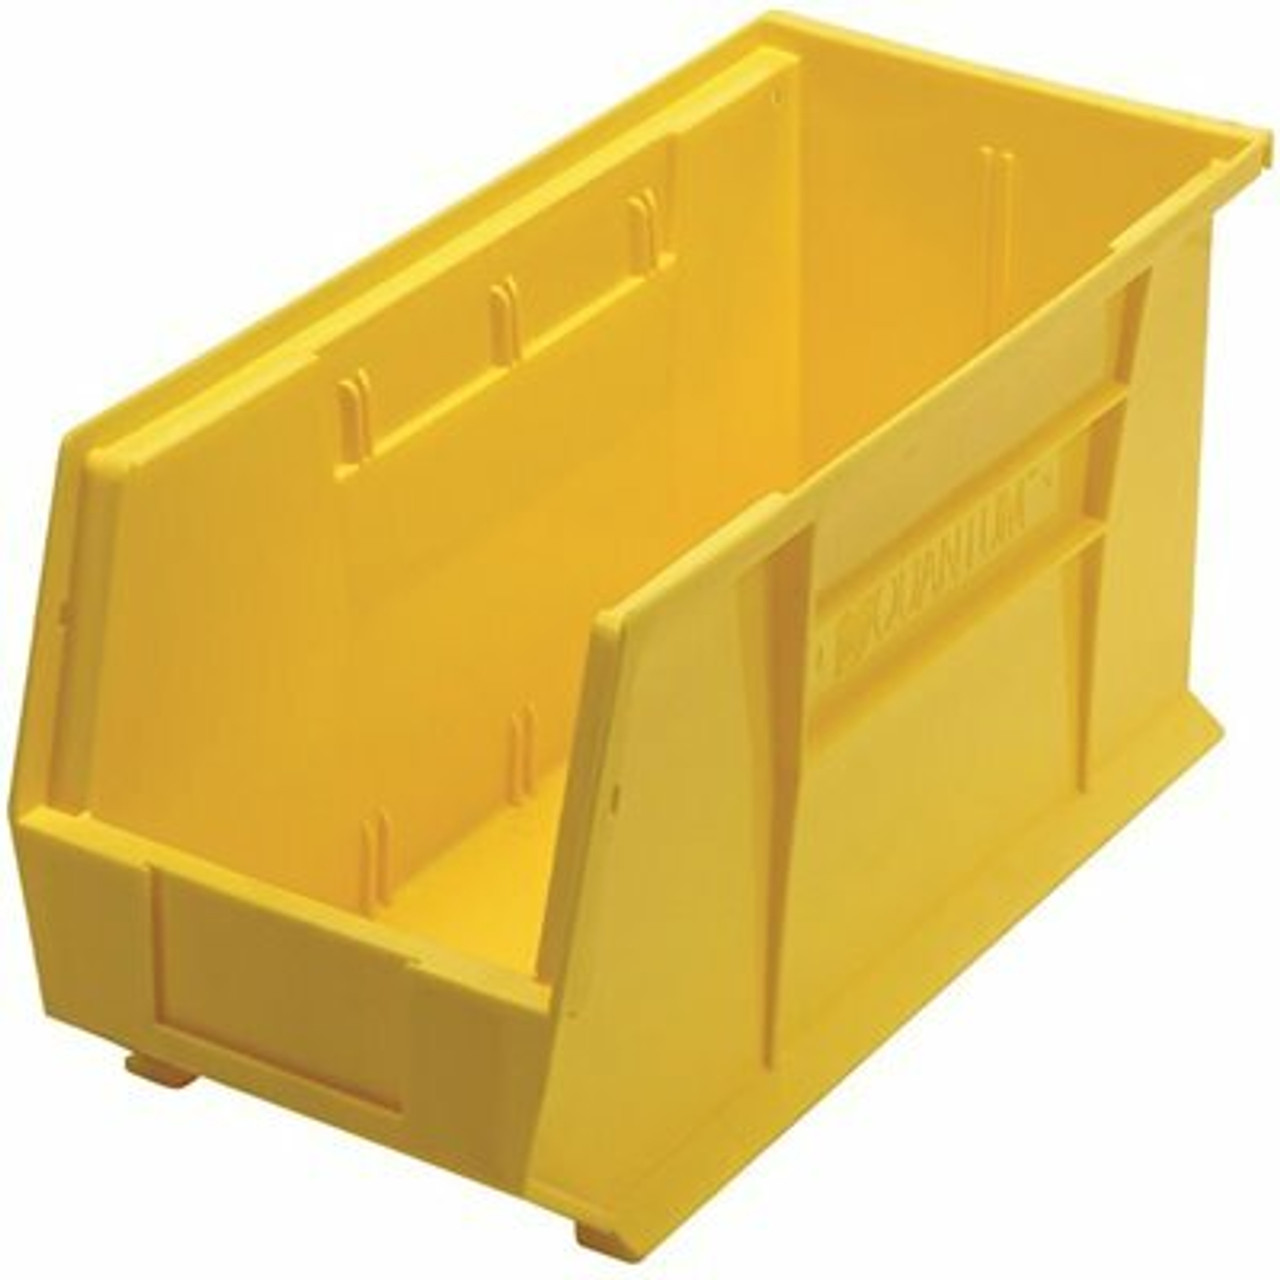 Quantum Storage Systems Ultra-Series 5 Gal. Stack And Hang Storage Tote In Yellow (6-Pack)